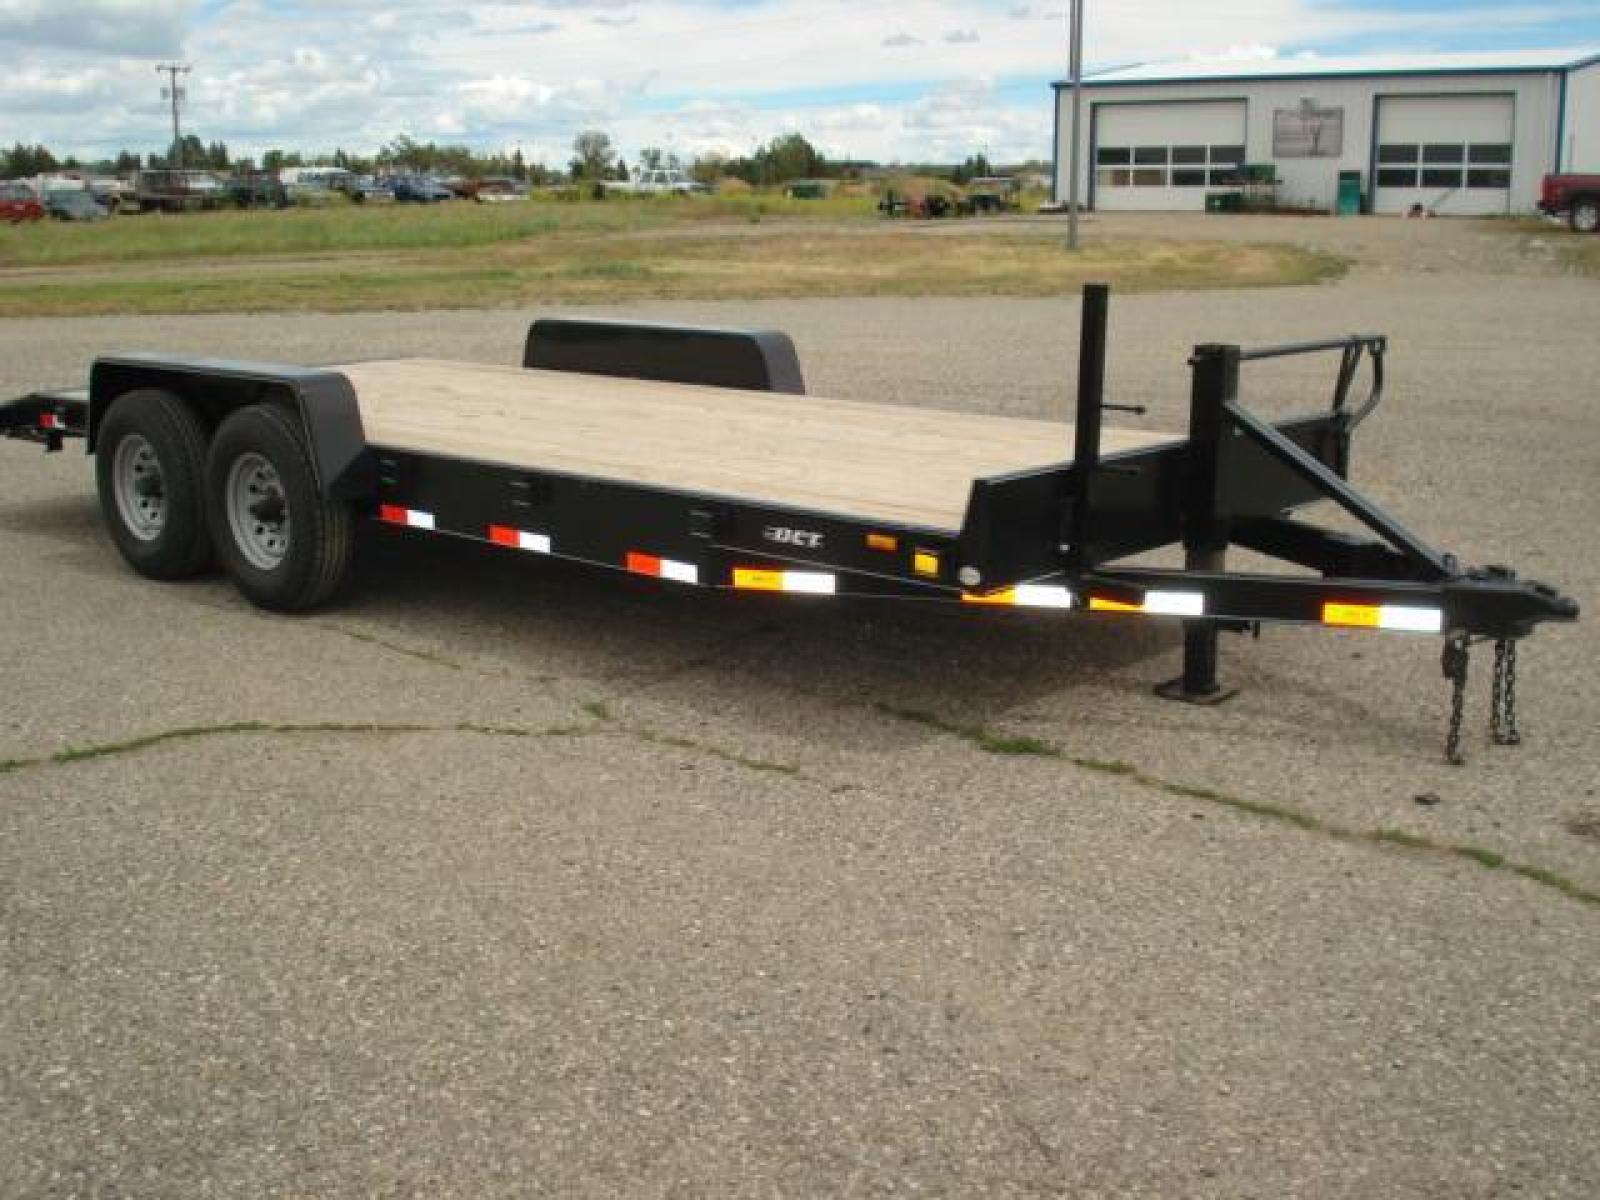 2023 Black DCT 7 x 20 Equipment , located at 310 West 1st Ave, Big Timber, MT, 59011, (406) 860-8510, 45.833511, -109.957809 - DCT 7 X 20 EQUIPMENT, 14K GVW, 2' DOVETAIL, HD SLIPPER SPRING SUSPENSION, 2 - 7K AXLES W- ELECTRIC BRAKES AND EZ LUBE HUBS, 6" CHANNEL FRAME, 6" C-CHANNEL FULL WRAP TONGUE, TREATED WOOD DECK, REAR STOW RAMPS, 10 PLY -16" RADIAL TIRES, 12K DROP FOOT JACK, STAKE POCKETS, 2 - 5/16" ADJUSTABLE COUPLER - Photo #1